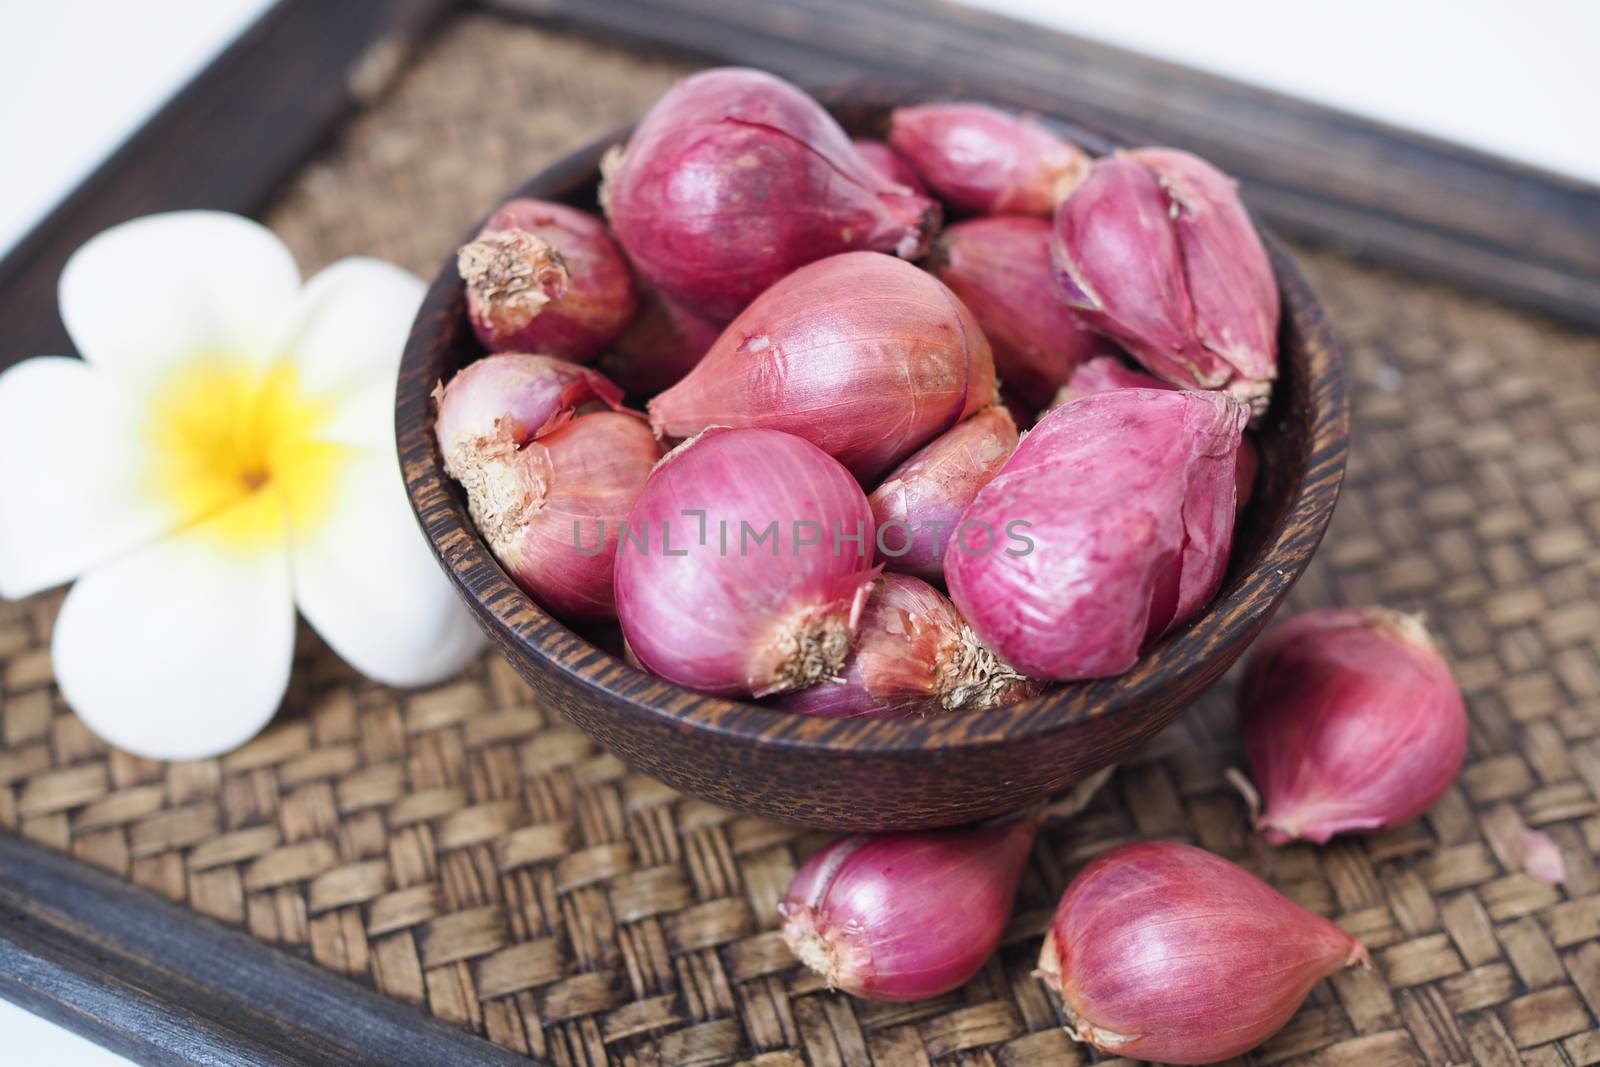 Red shallots in a bowl, placed on an old wooden tray bamboo weav by kittima05